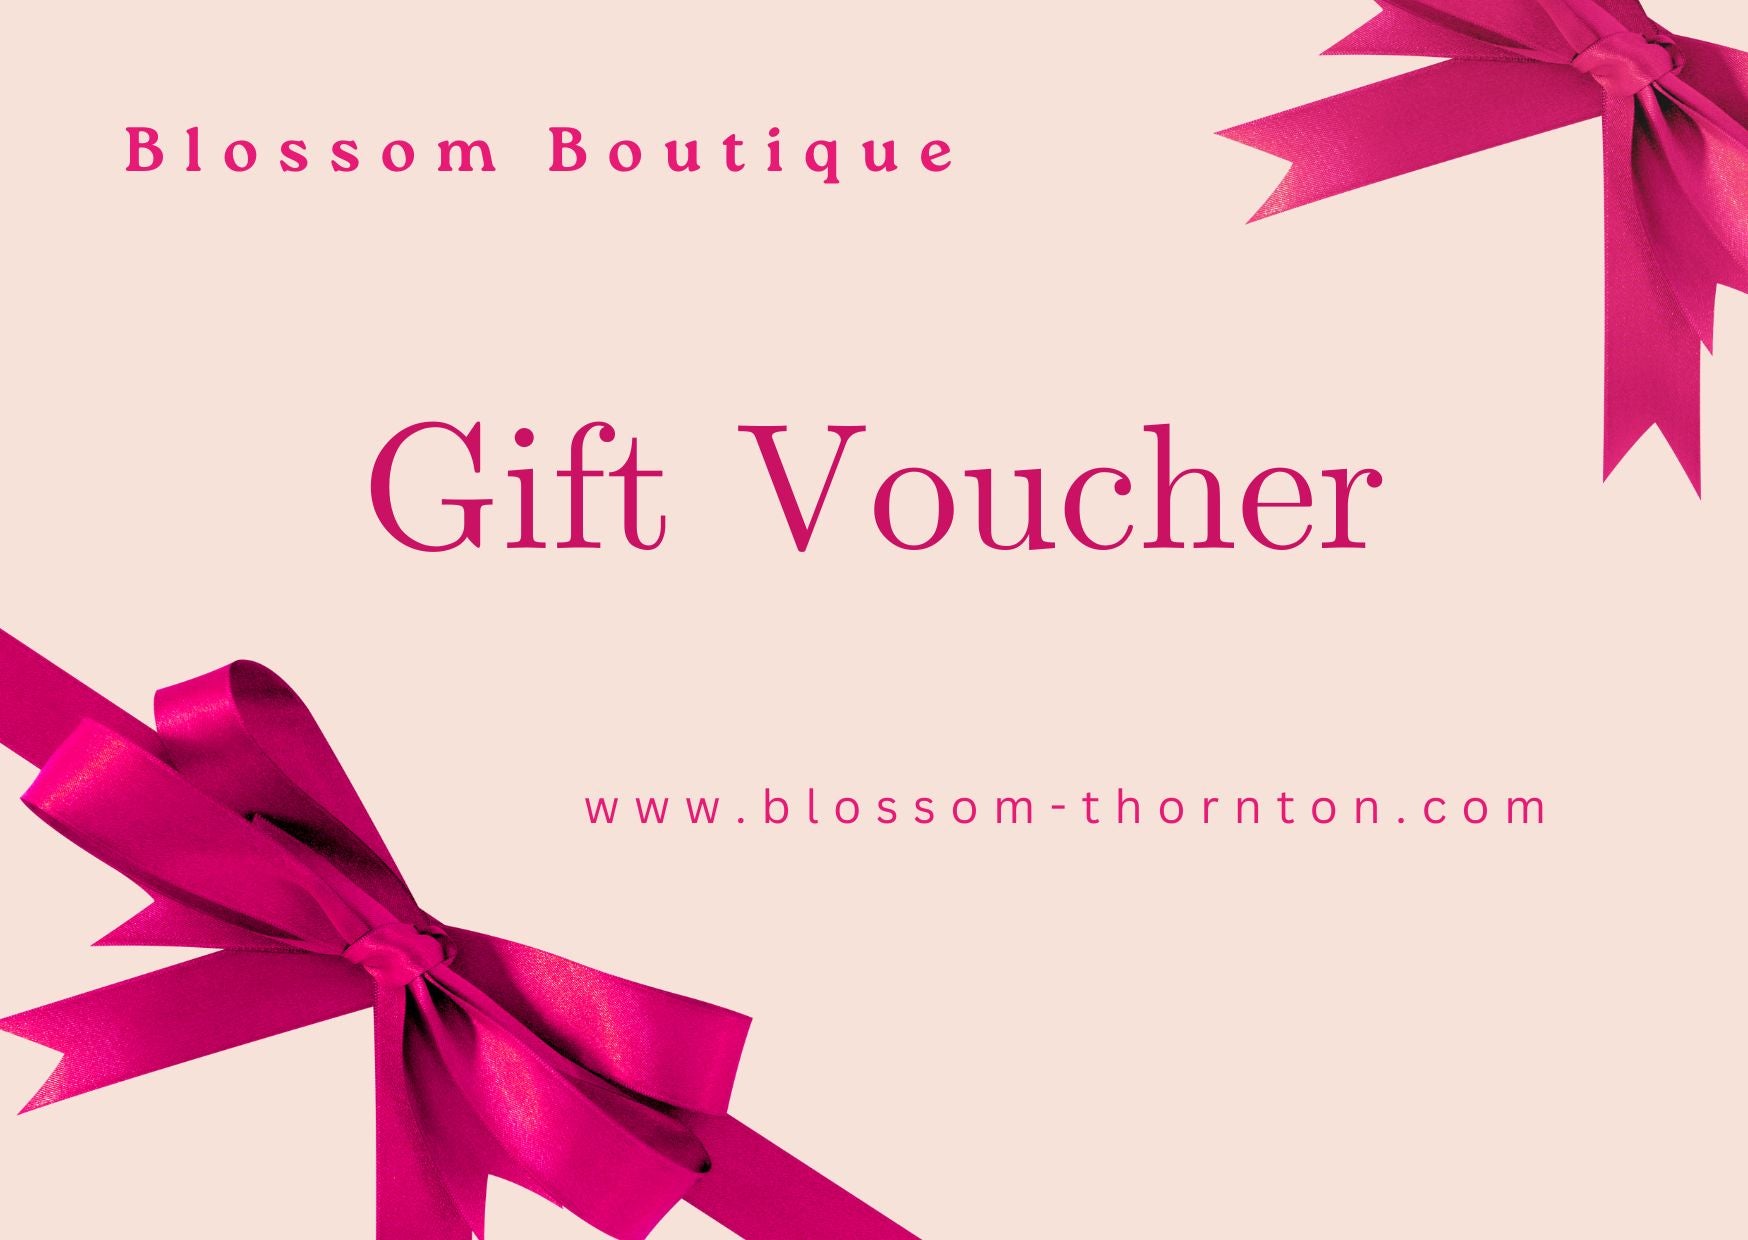 Give the gift of a Gift Voucher this year